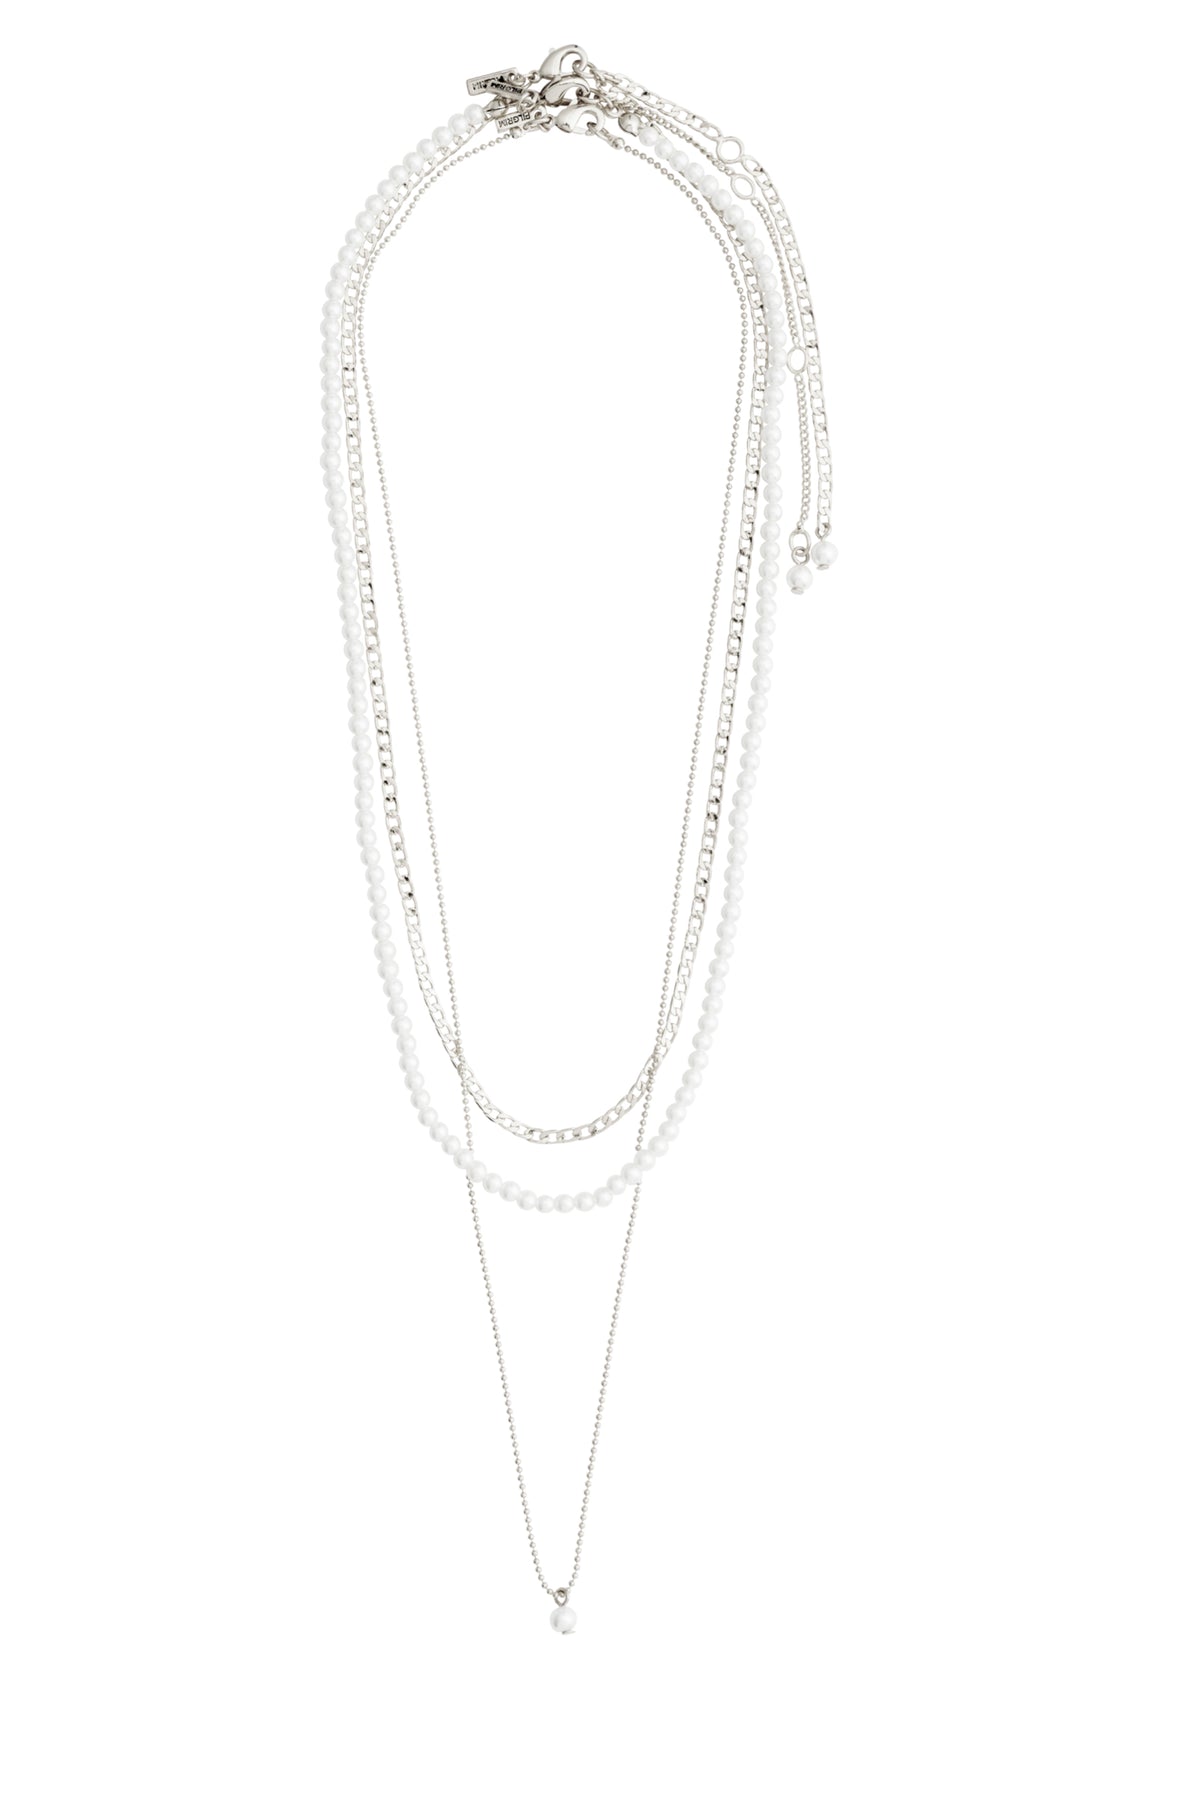 Baker Necklace 3 -In-1 Set - Silver Plated